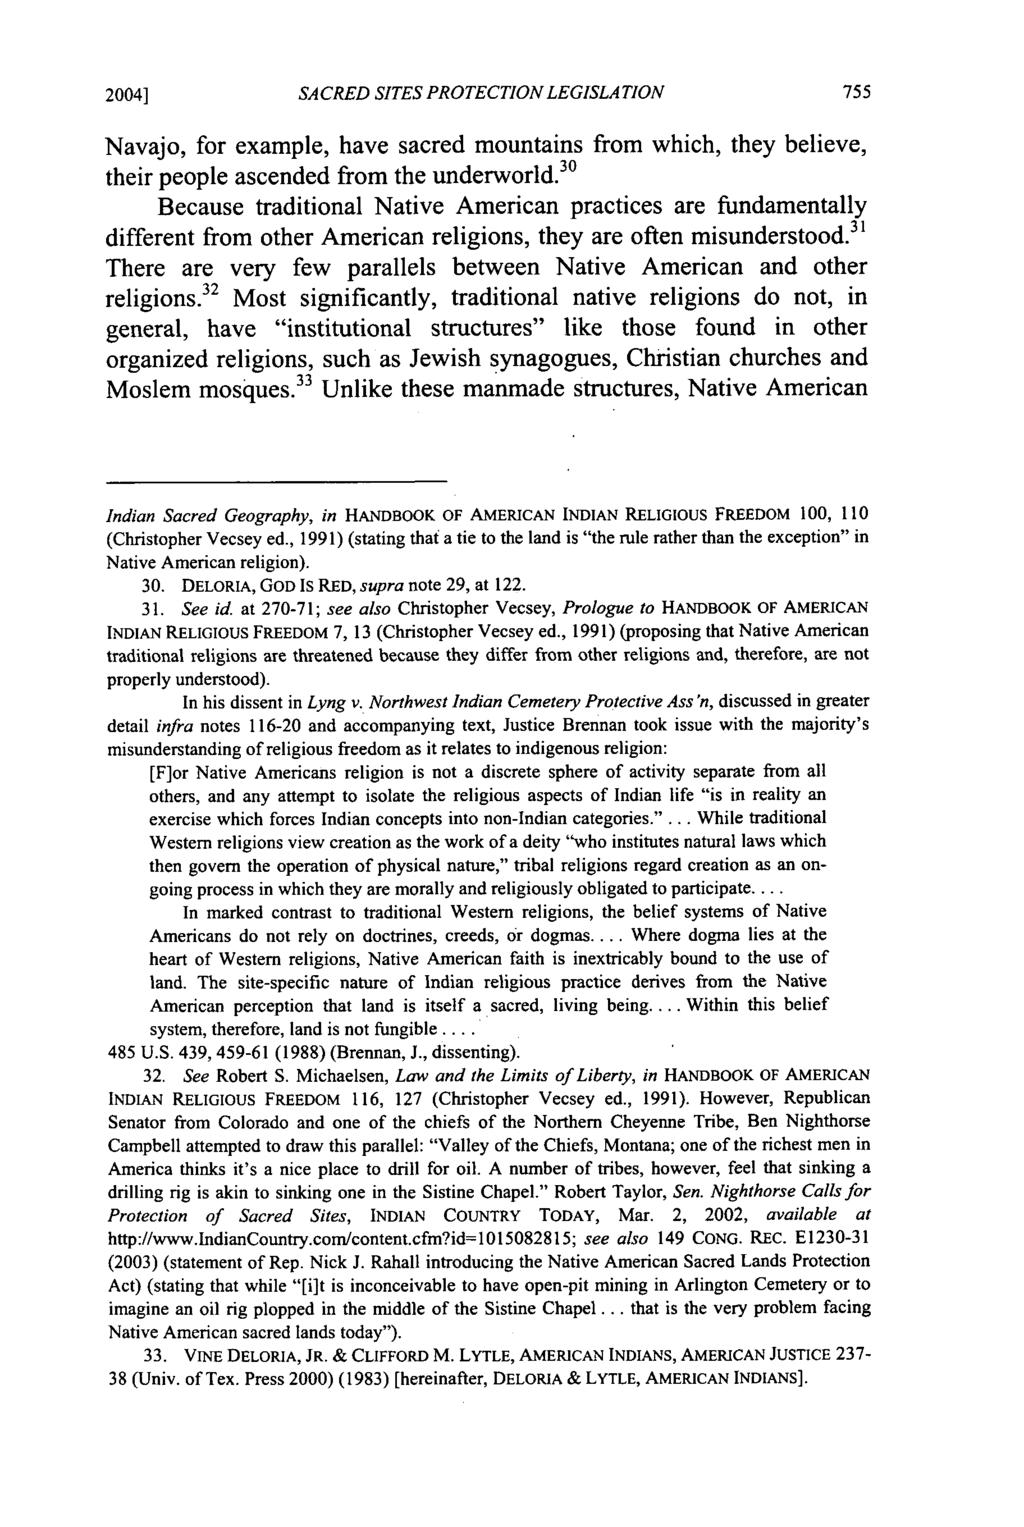 2004] McDonald: Secularizing the Sacrosanct: Defining "Sacred" for Native America SACRED SITES PROTECTION LEGISLATION Navajo, for example, have sacred mountains from which, they believe, their people